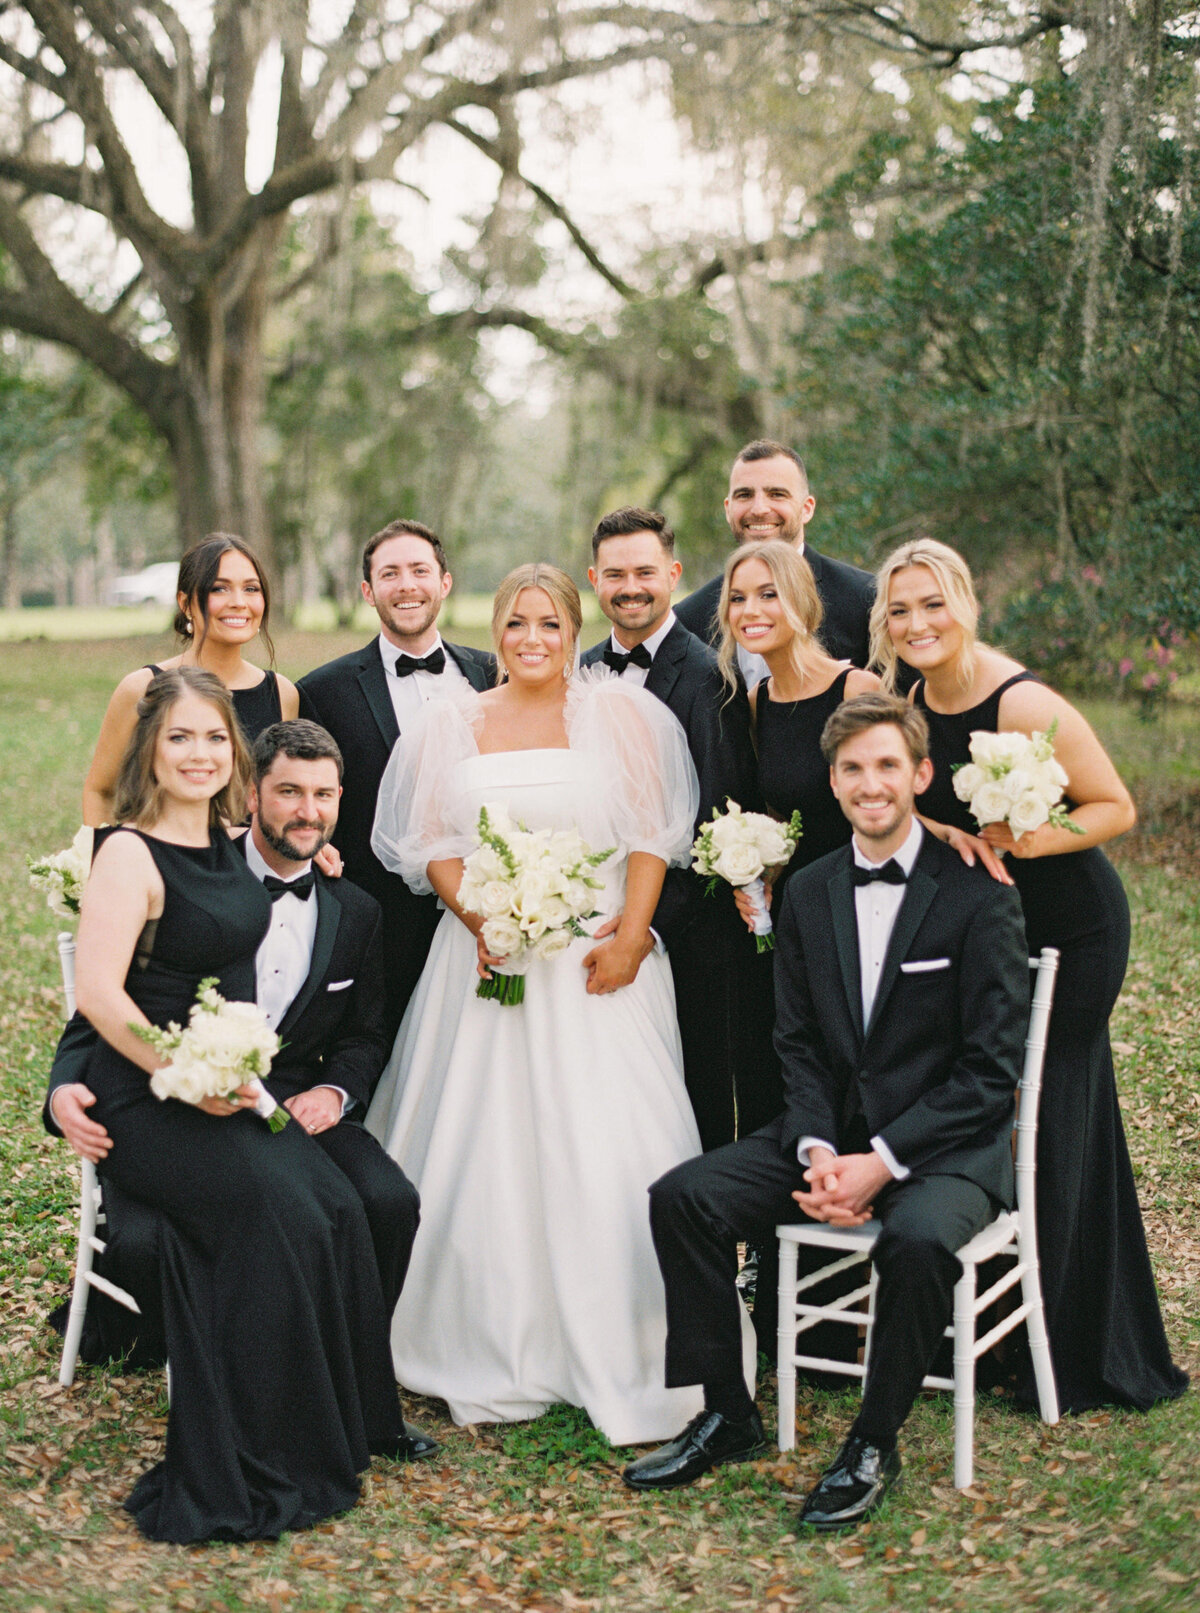 Bride and groom take portraits with their wedding party